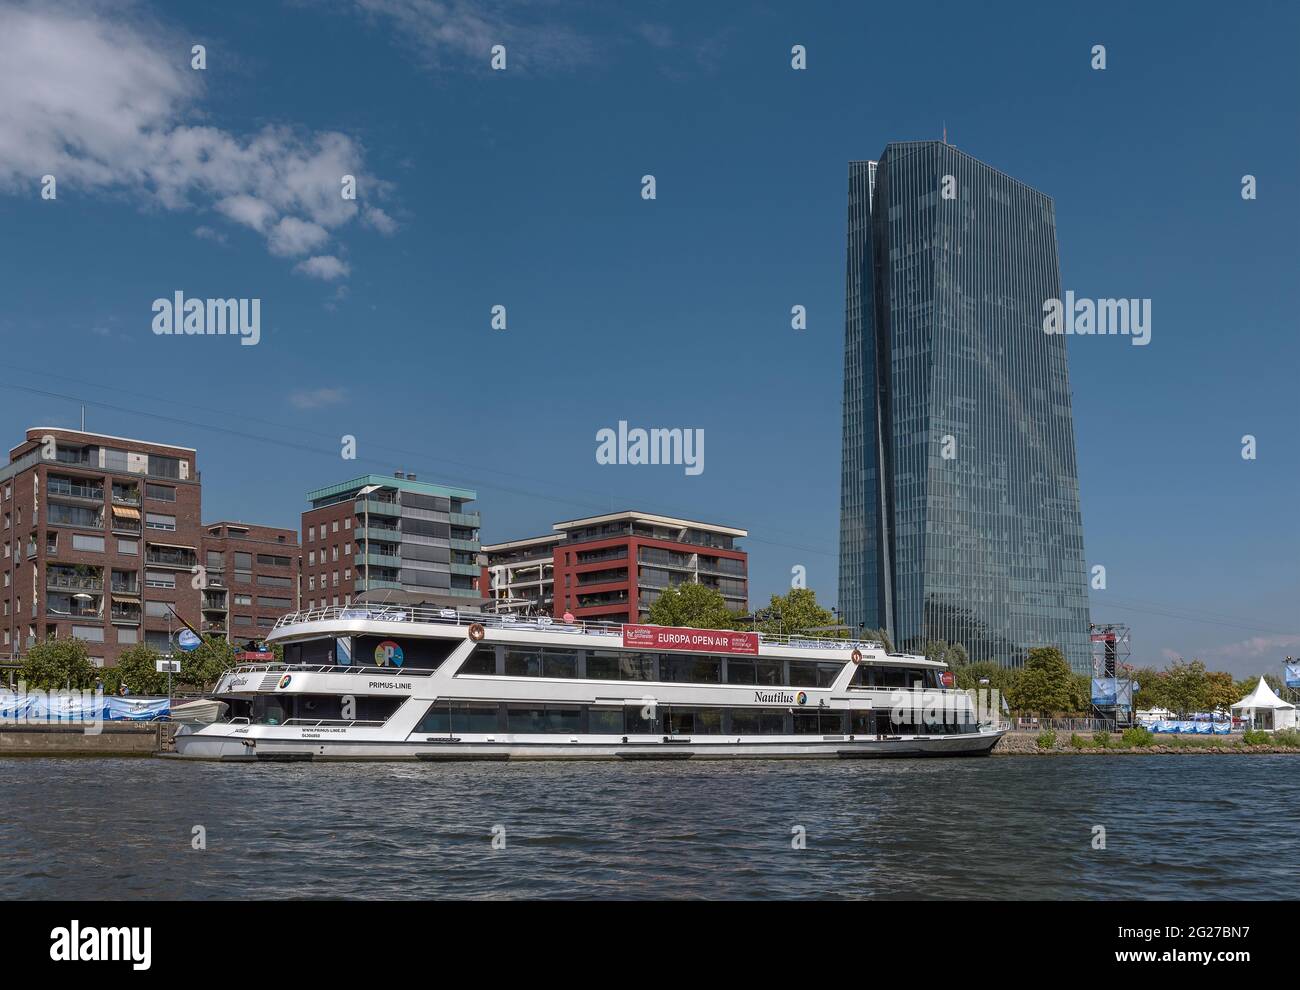 Tourist cruise boat on the Main river in front of the building of the European Central Bank, Frankfurt, Germany Stock Photo